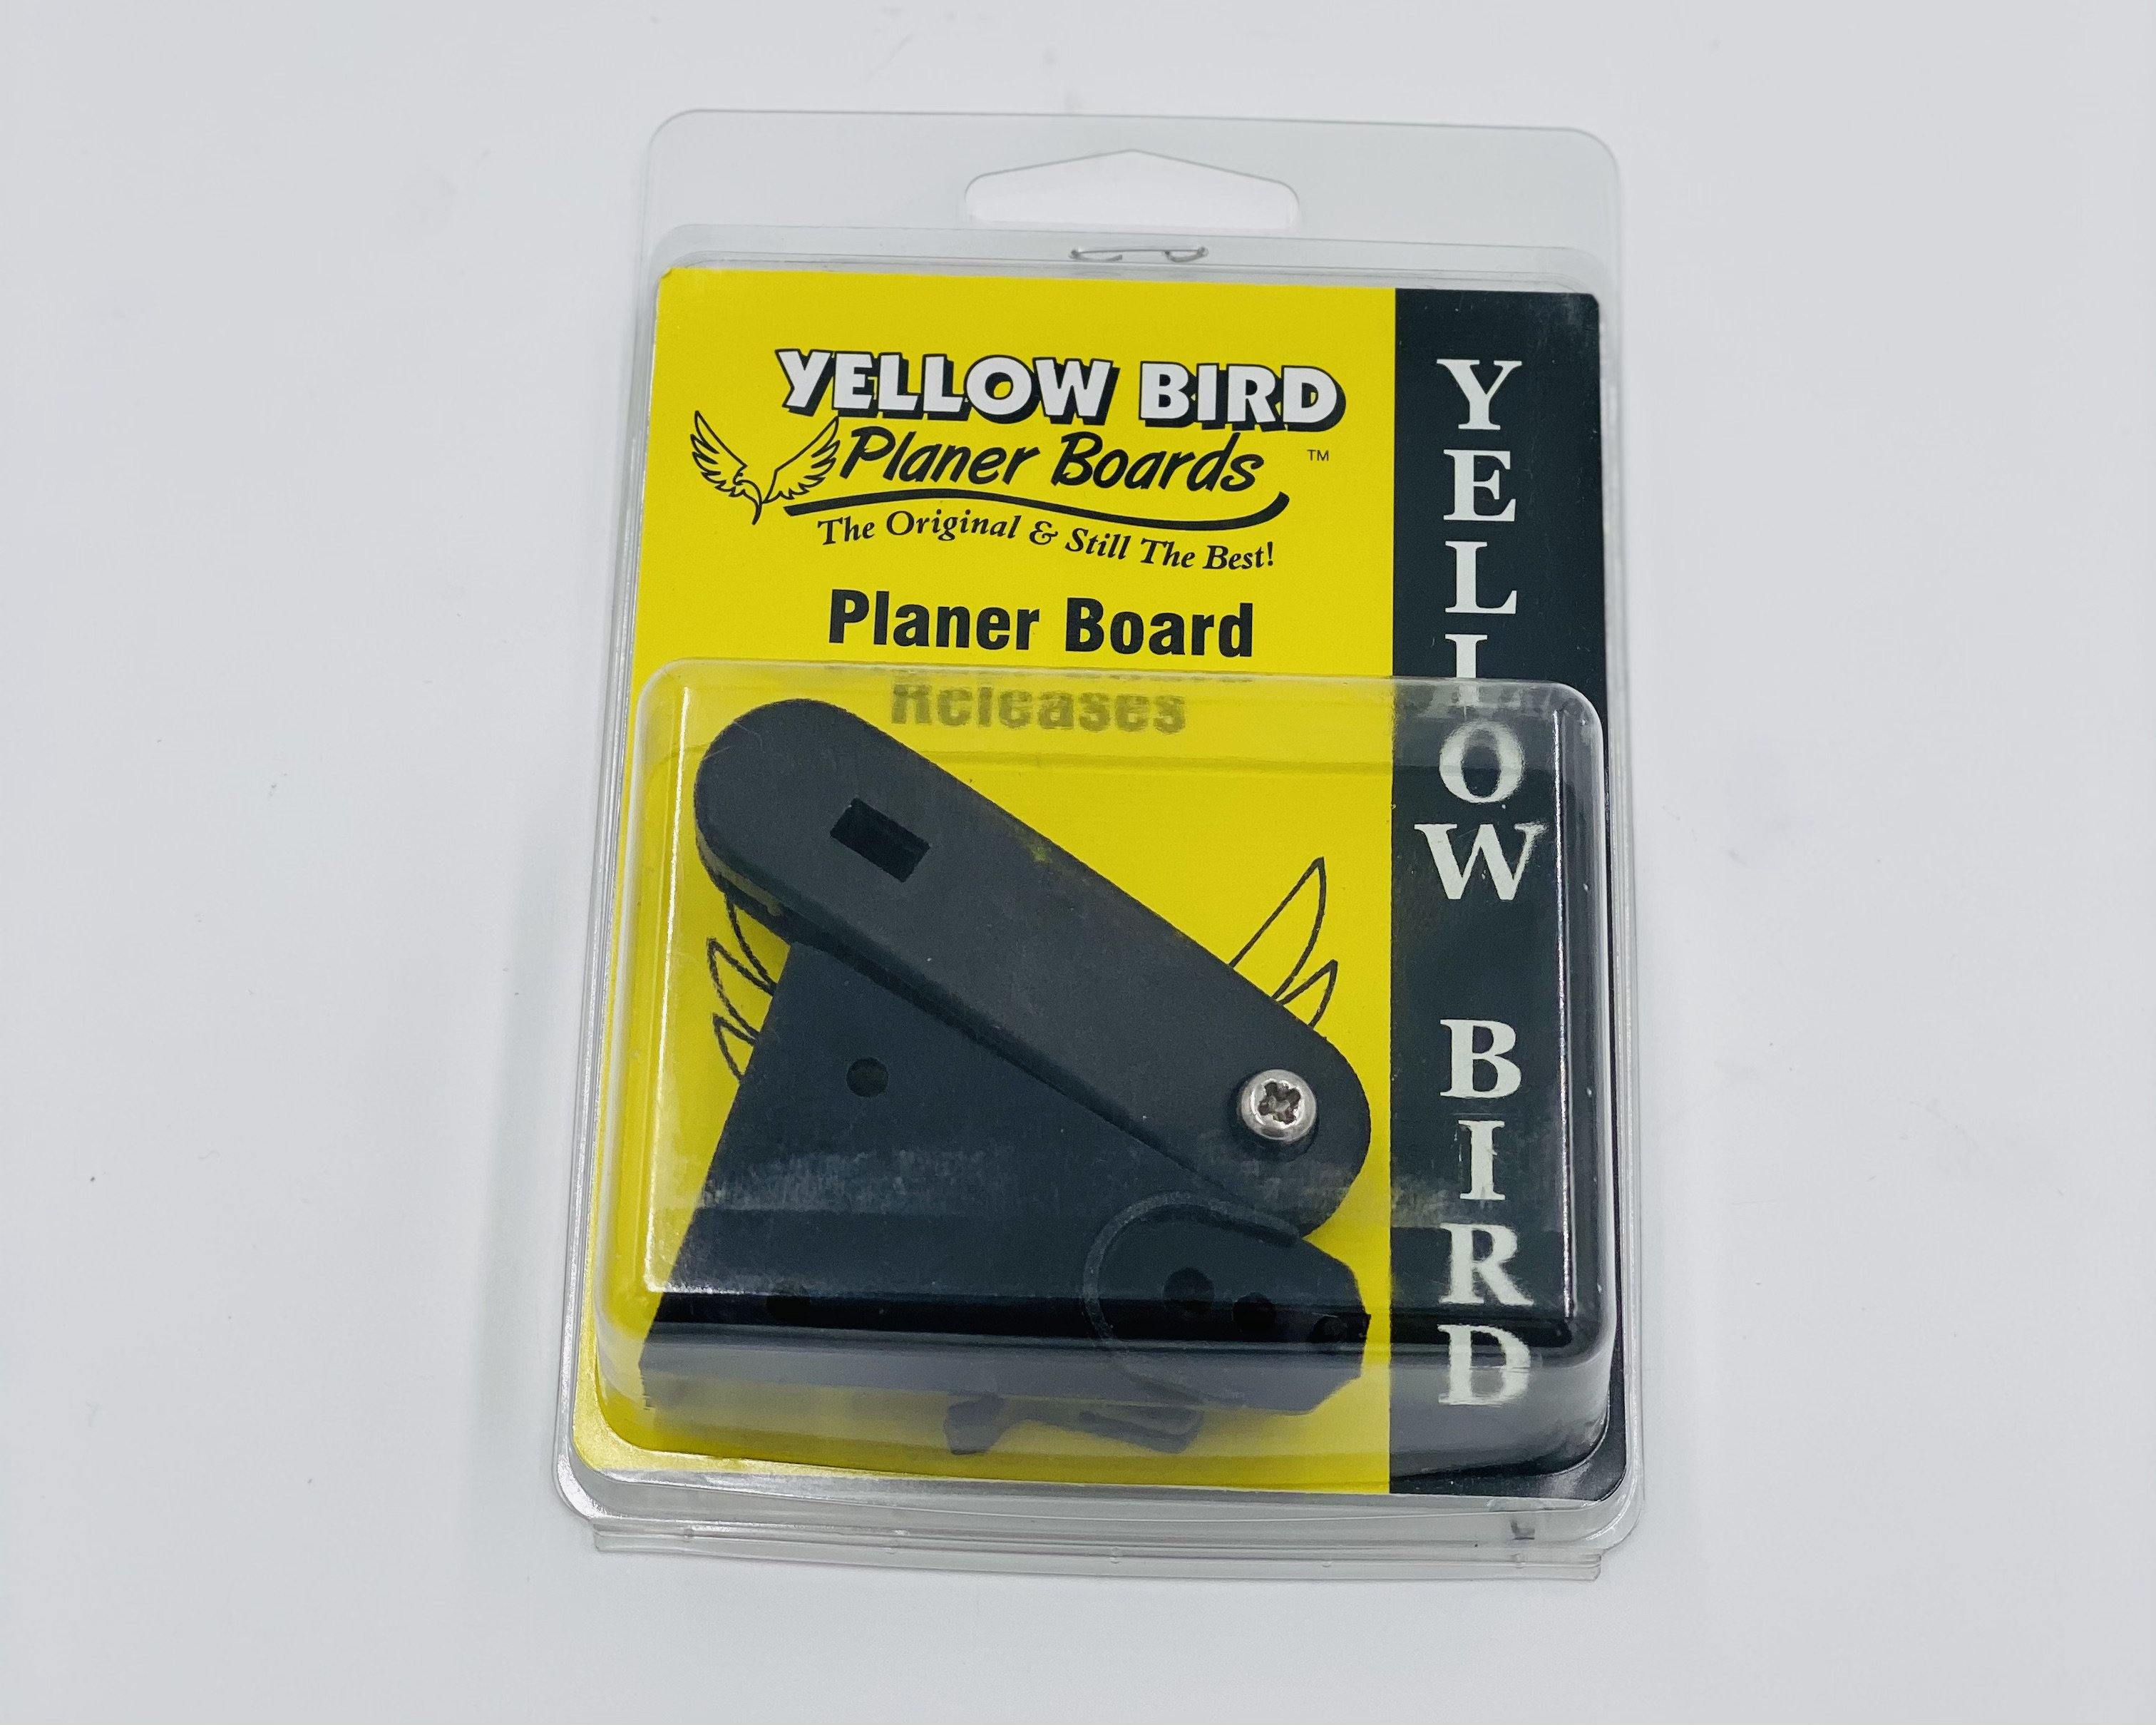 Planer board release – Taps and Tackle Co.